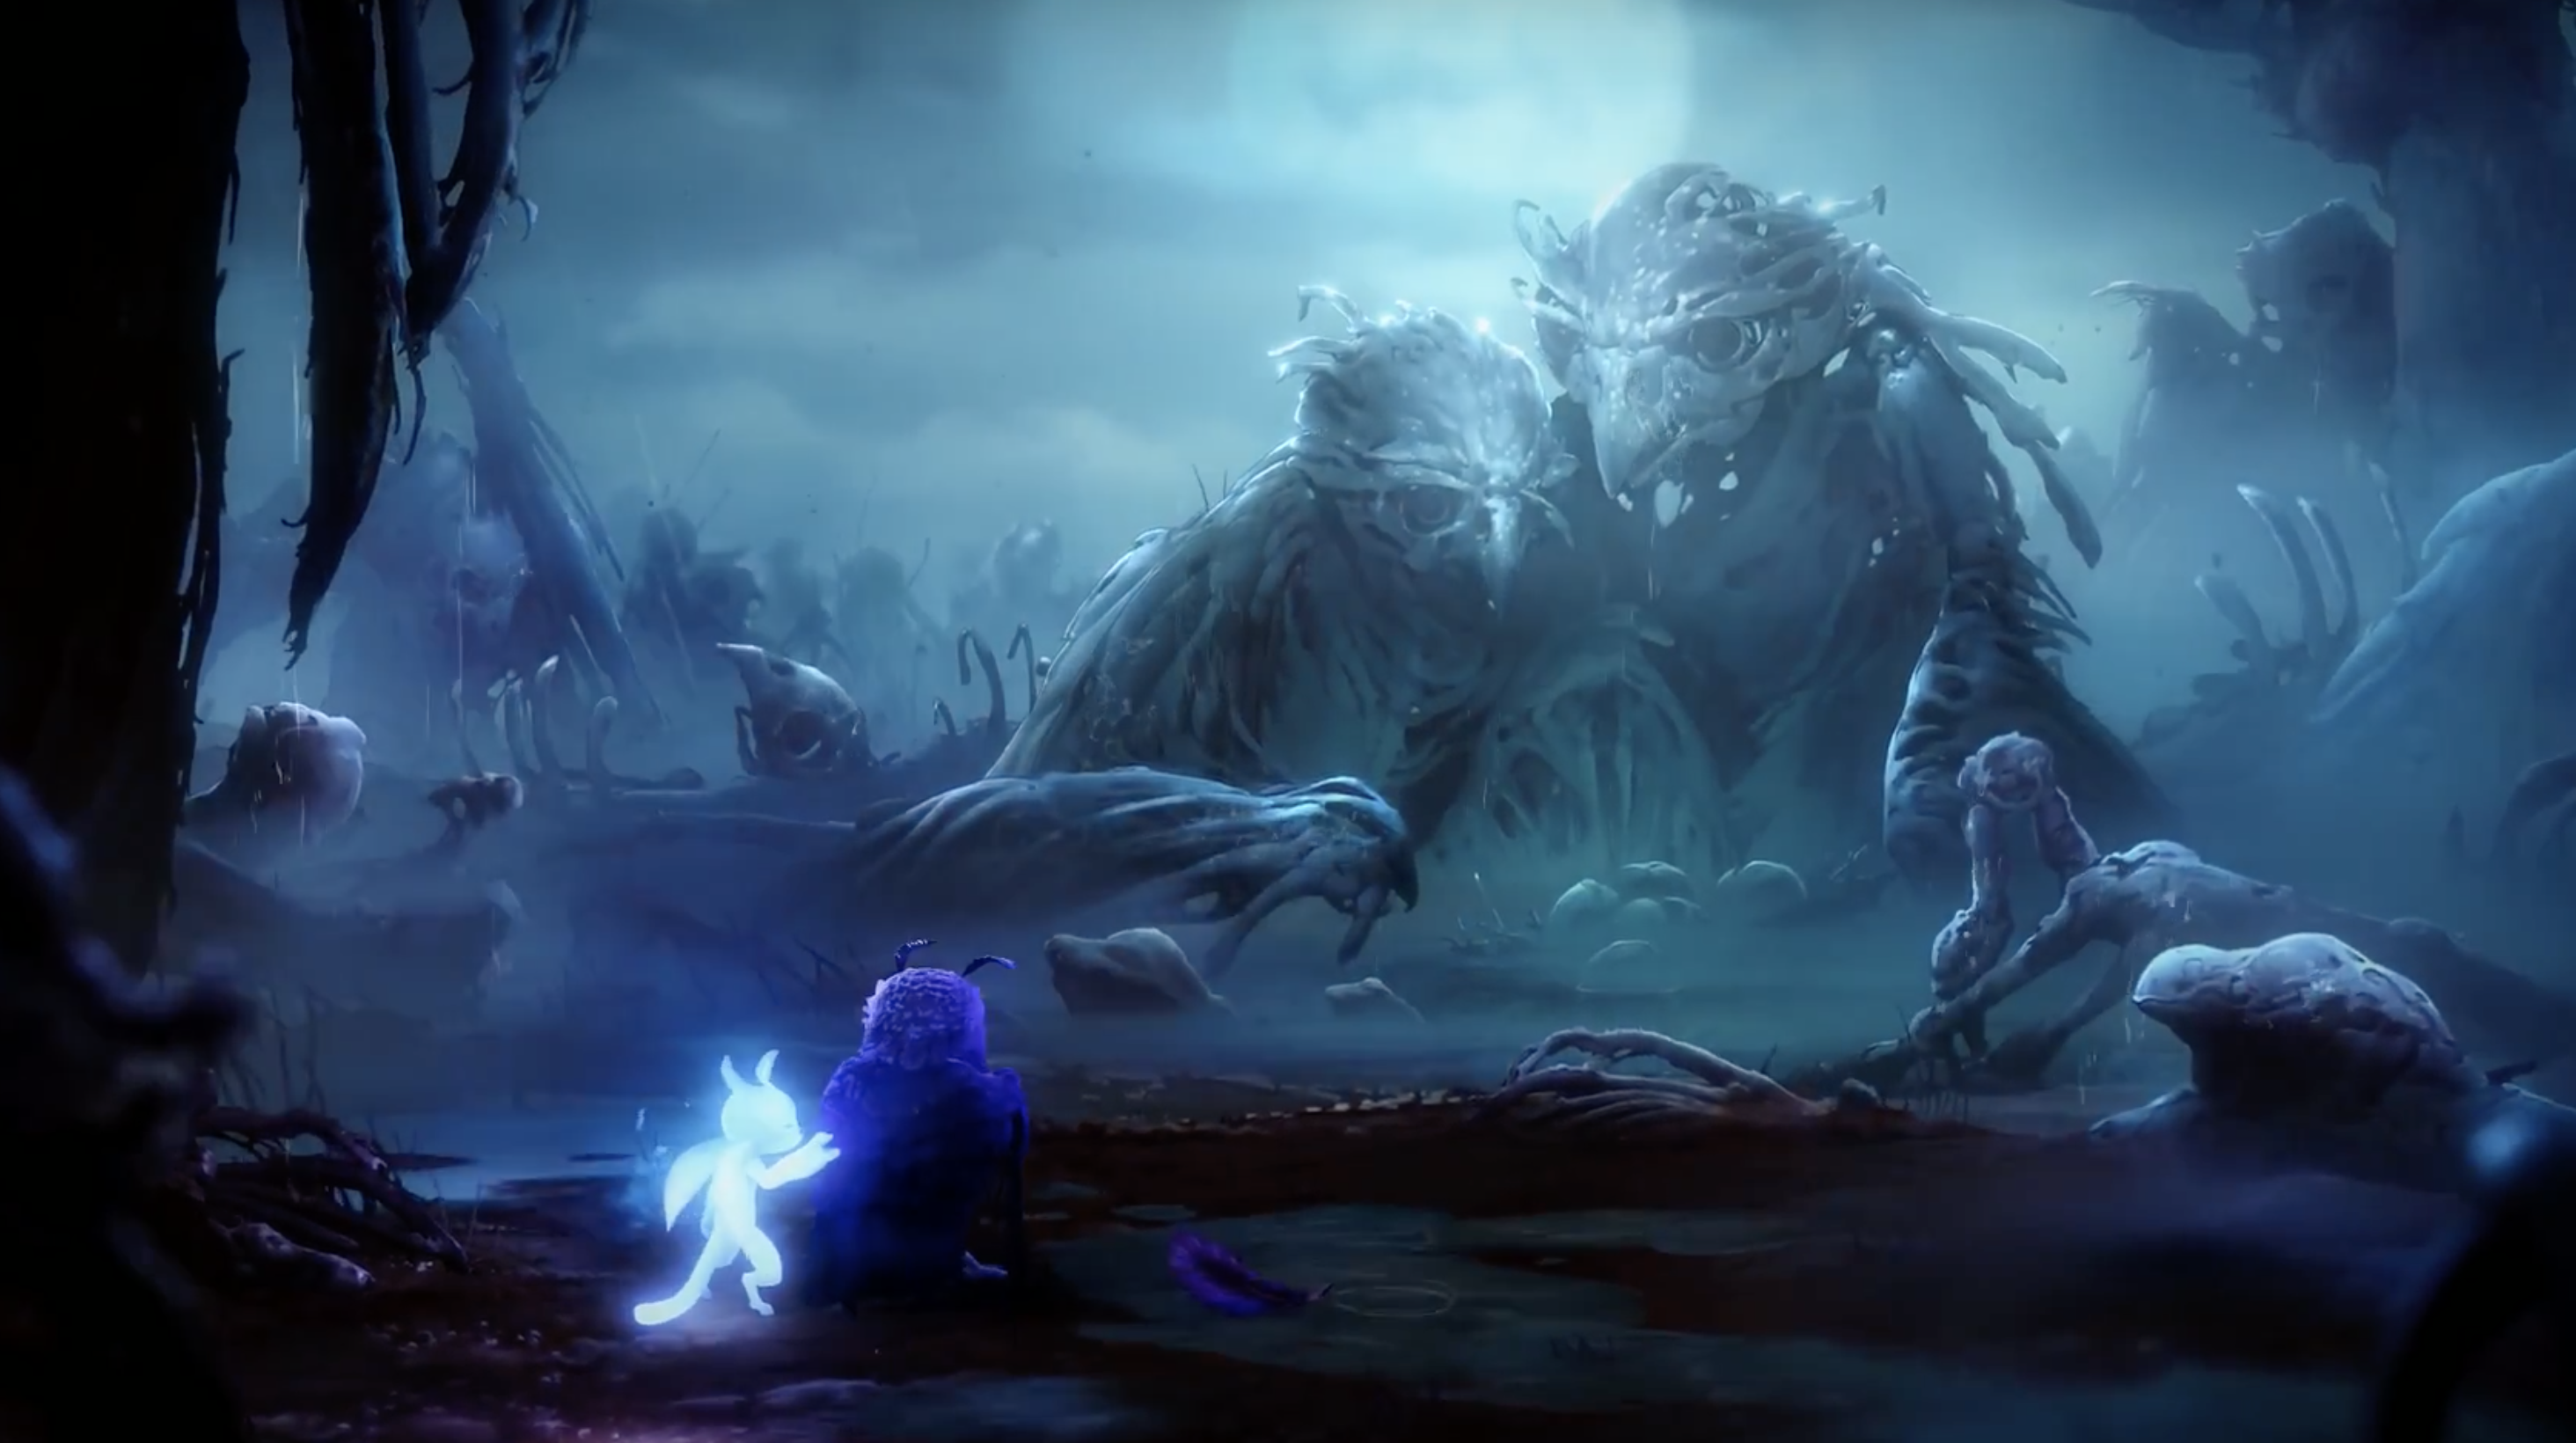 Ori and the will of the wisps